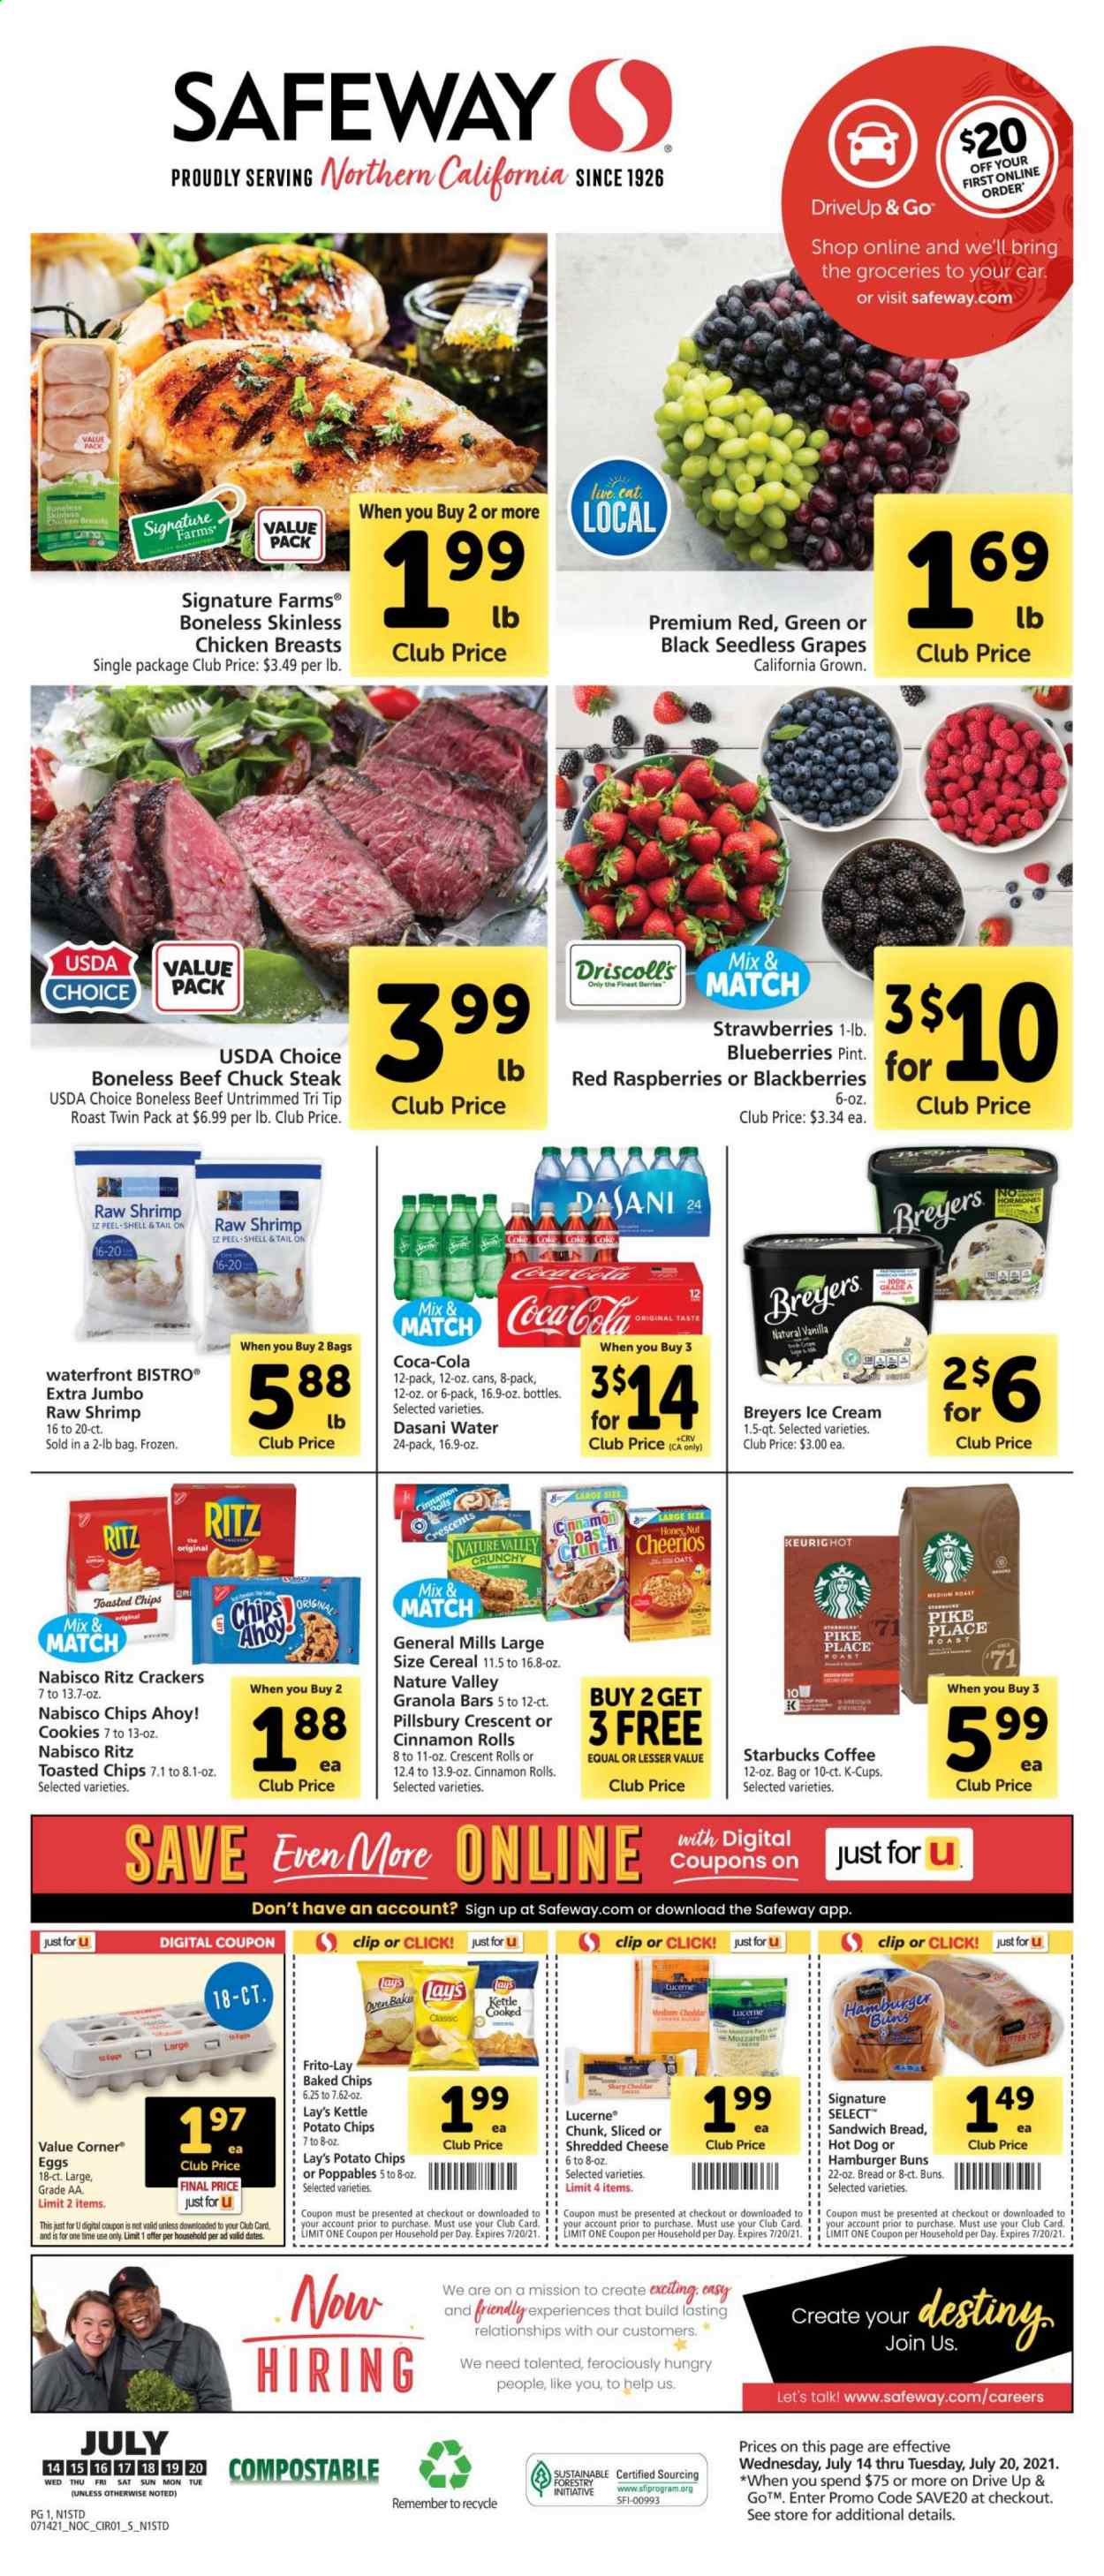 thumbnail - Safeway Flyer - 07/14/2021 - 07/20/2021 - Sales products - seedless grapes, buns, burger buns, cinnamon roll, crescent rolls, blackberries, blueberries, grapes, raspberries, strawberries, chicken breasts, beef meat, steak, chuck steak, shrimps, hot dog, Pillsbury, shredded cheese, eggs, butter, ice cream, cookies, crackers, Chips Ahoy!, RITZ, potato chips, Lay’s, Frito-Lay, sugar, oats, cereals, Cheerios, granola bar, Nature Valley, Coca-Cola, coffee, Starbucks, coffee capsules, K-Cups, Sharp. Page 1.